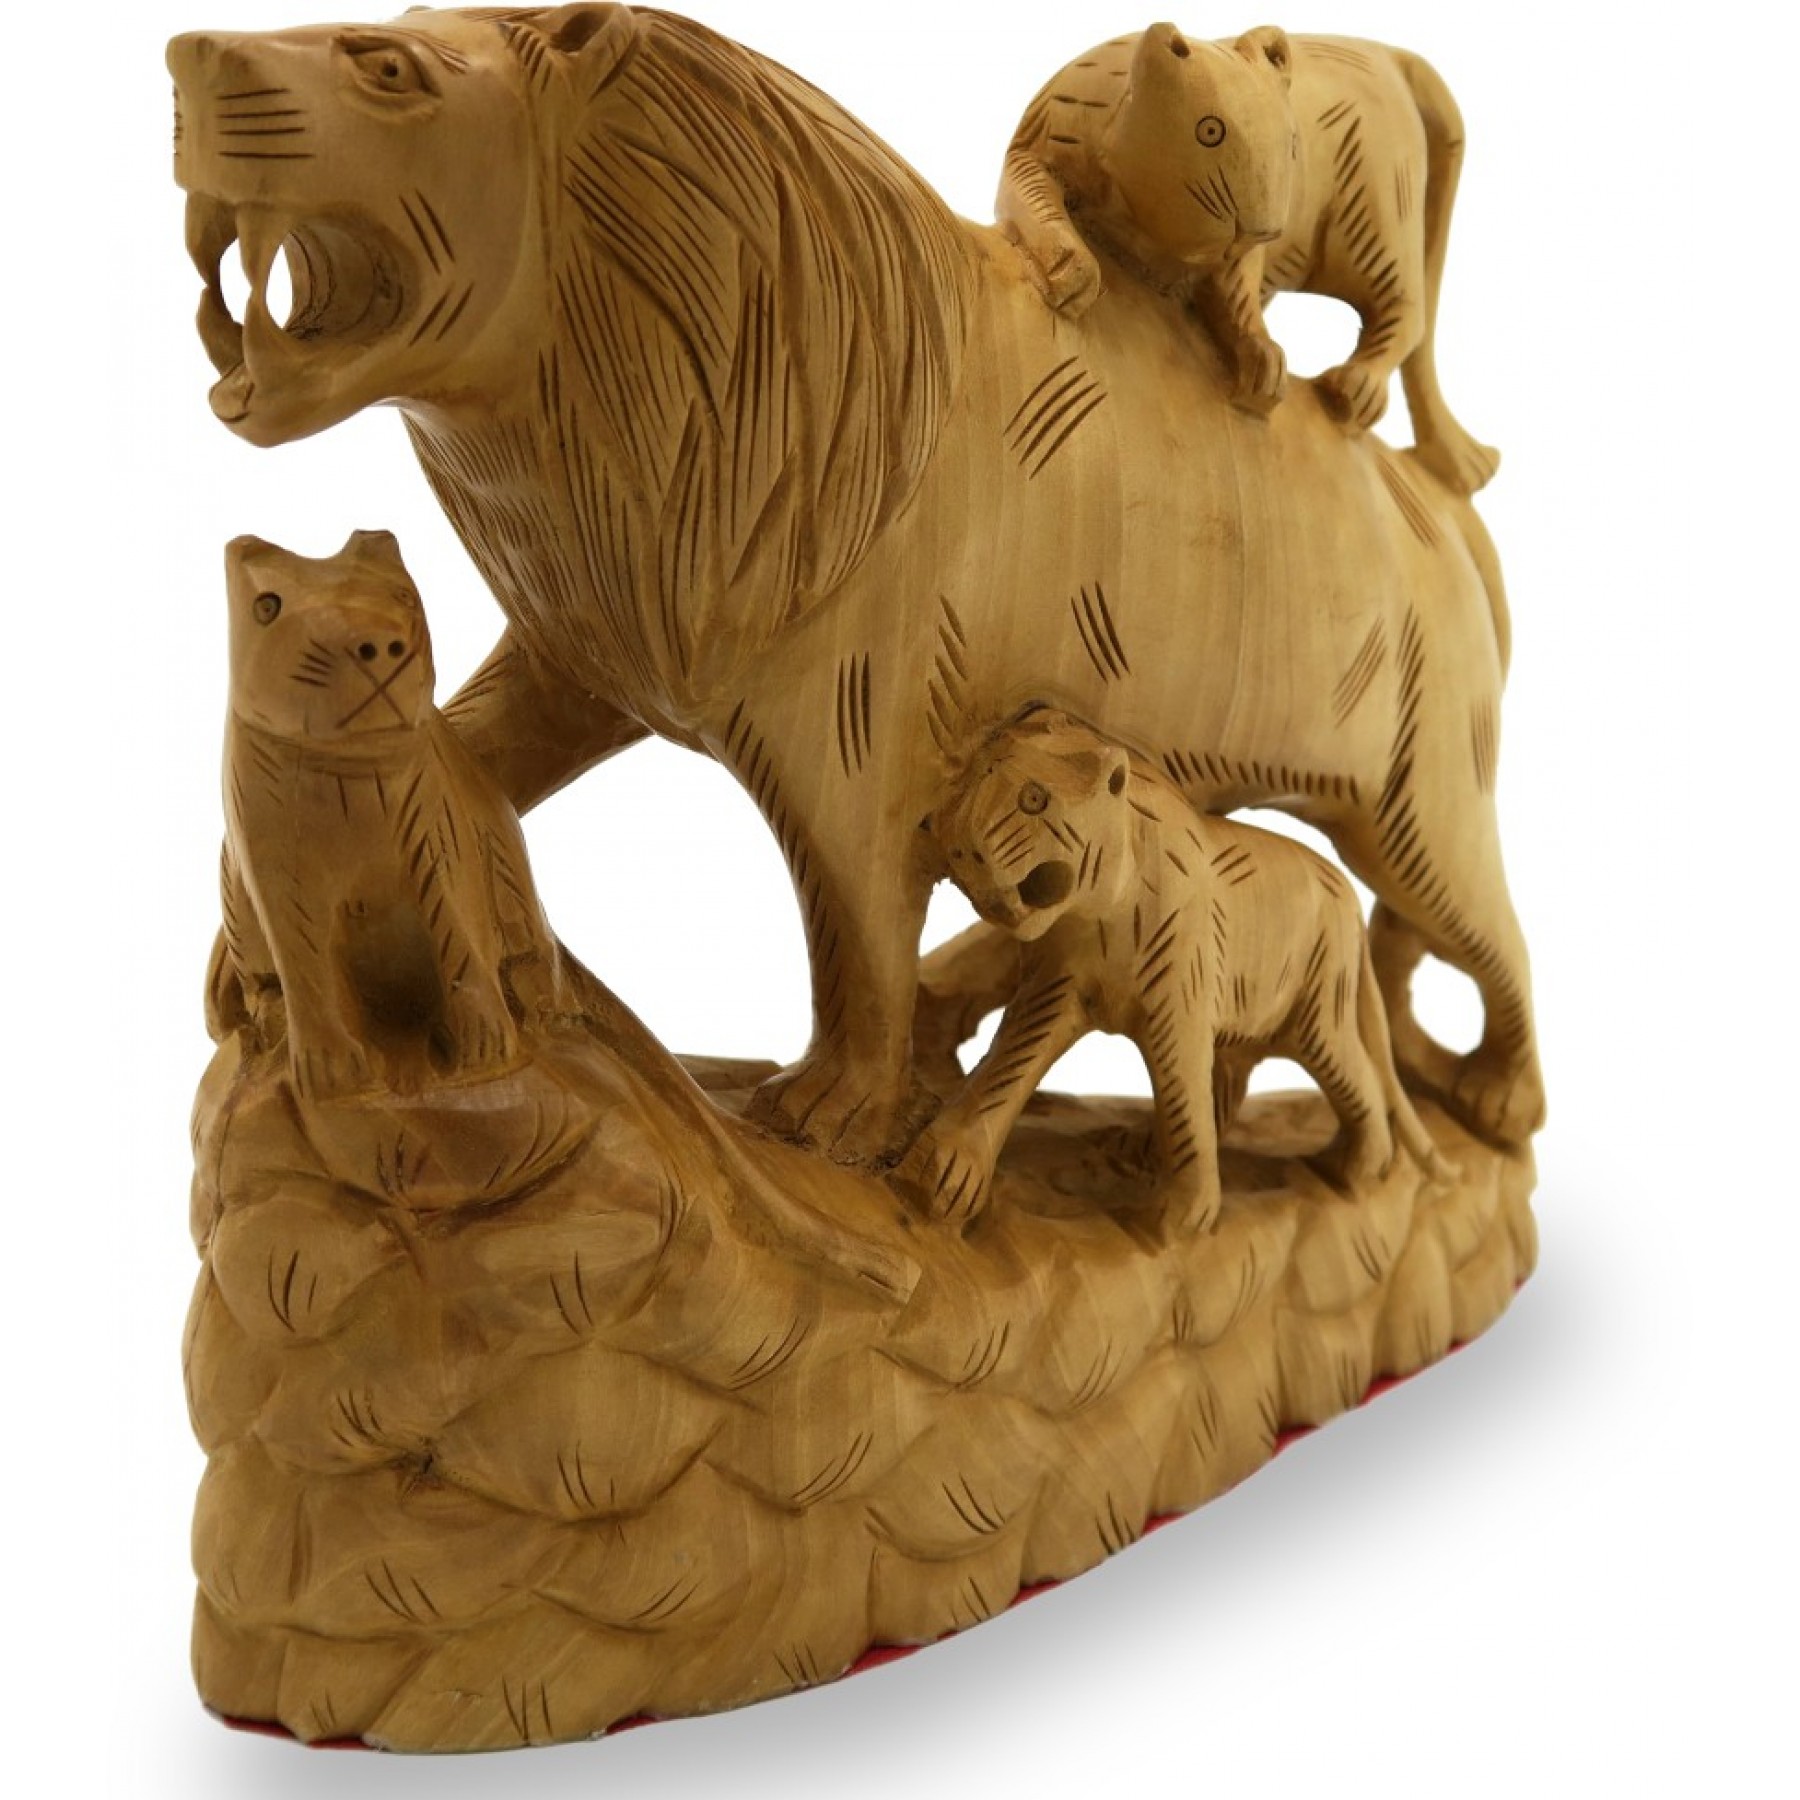 Lion Family Carved in Wood - Animal Statues in Wooden Indian Handicrafts